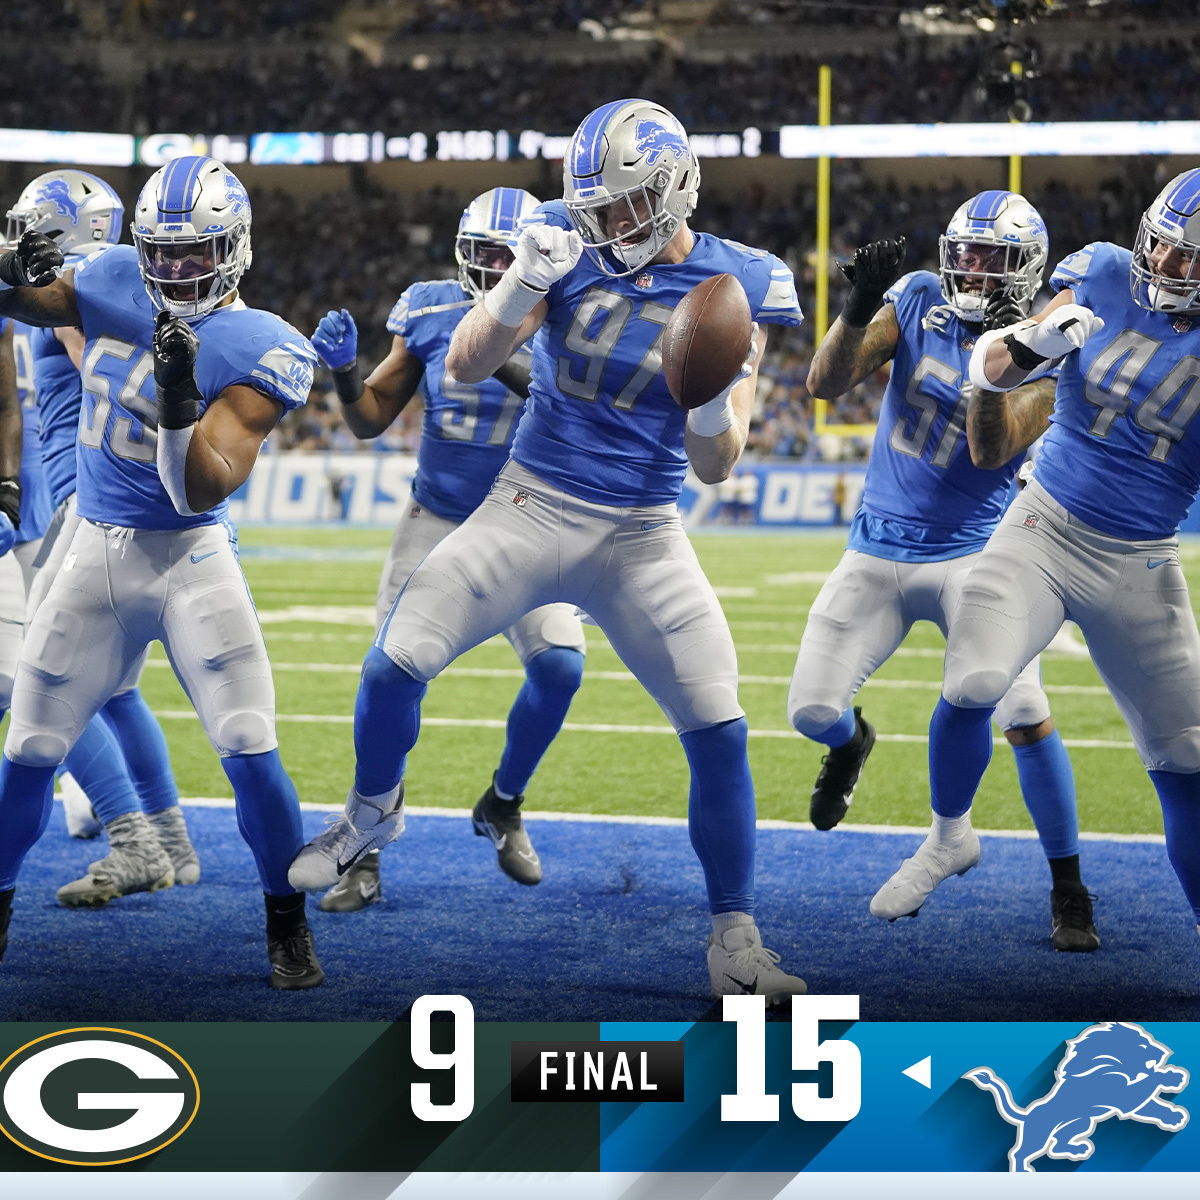 FINAL: The @Lions defeat their NFC North rival! #GBvsDET